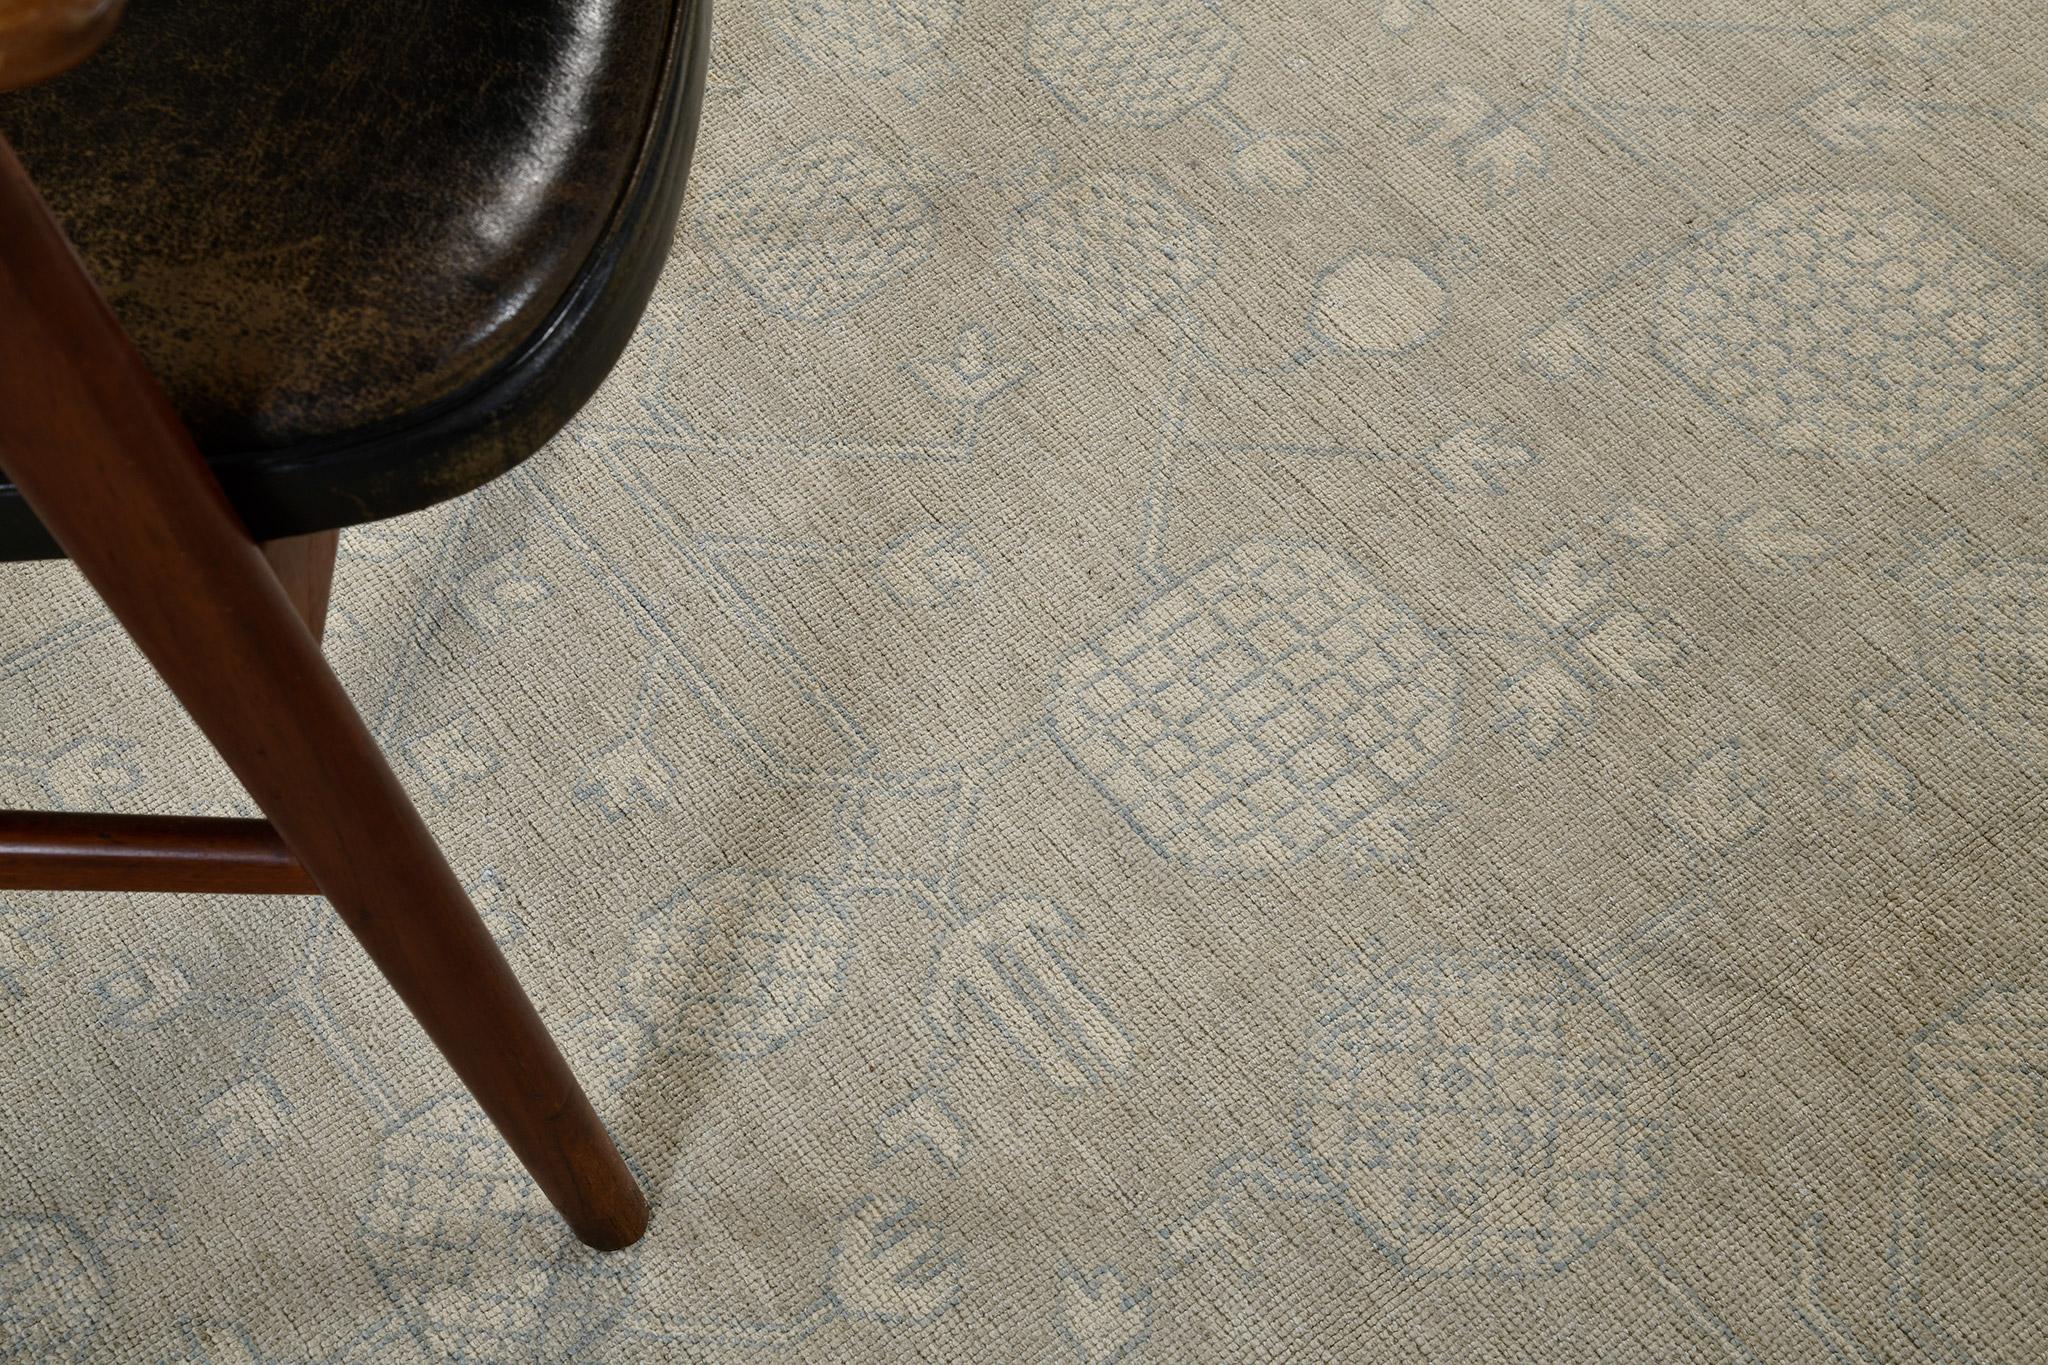 Our most impressive revived Khotan design rug of Safira Collection is perfect for your home spaces. It will prove its versatility because of the ashblue outline that turned into notable details and patterns. A field of muted cinnamon has its own